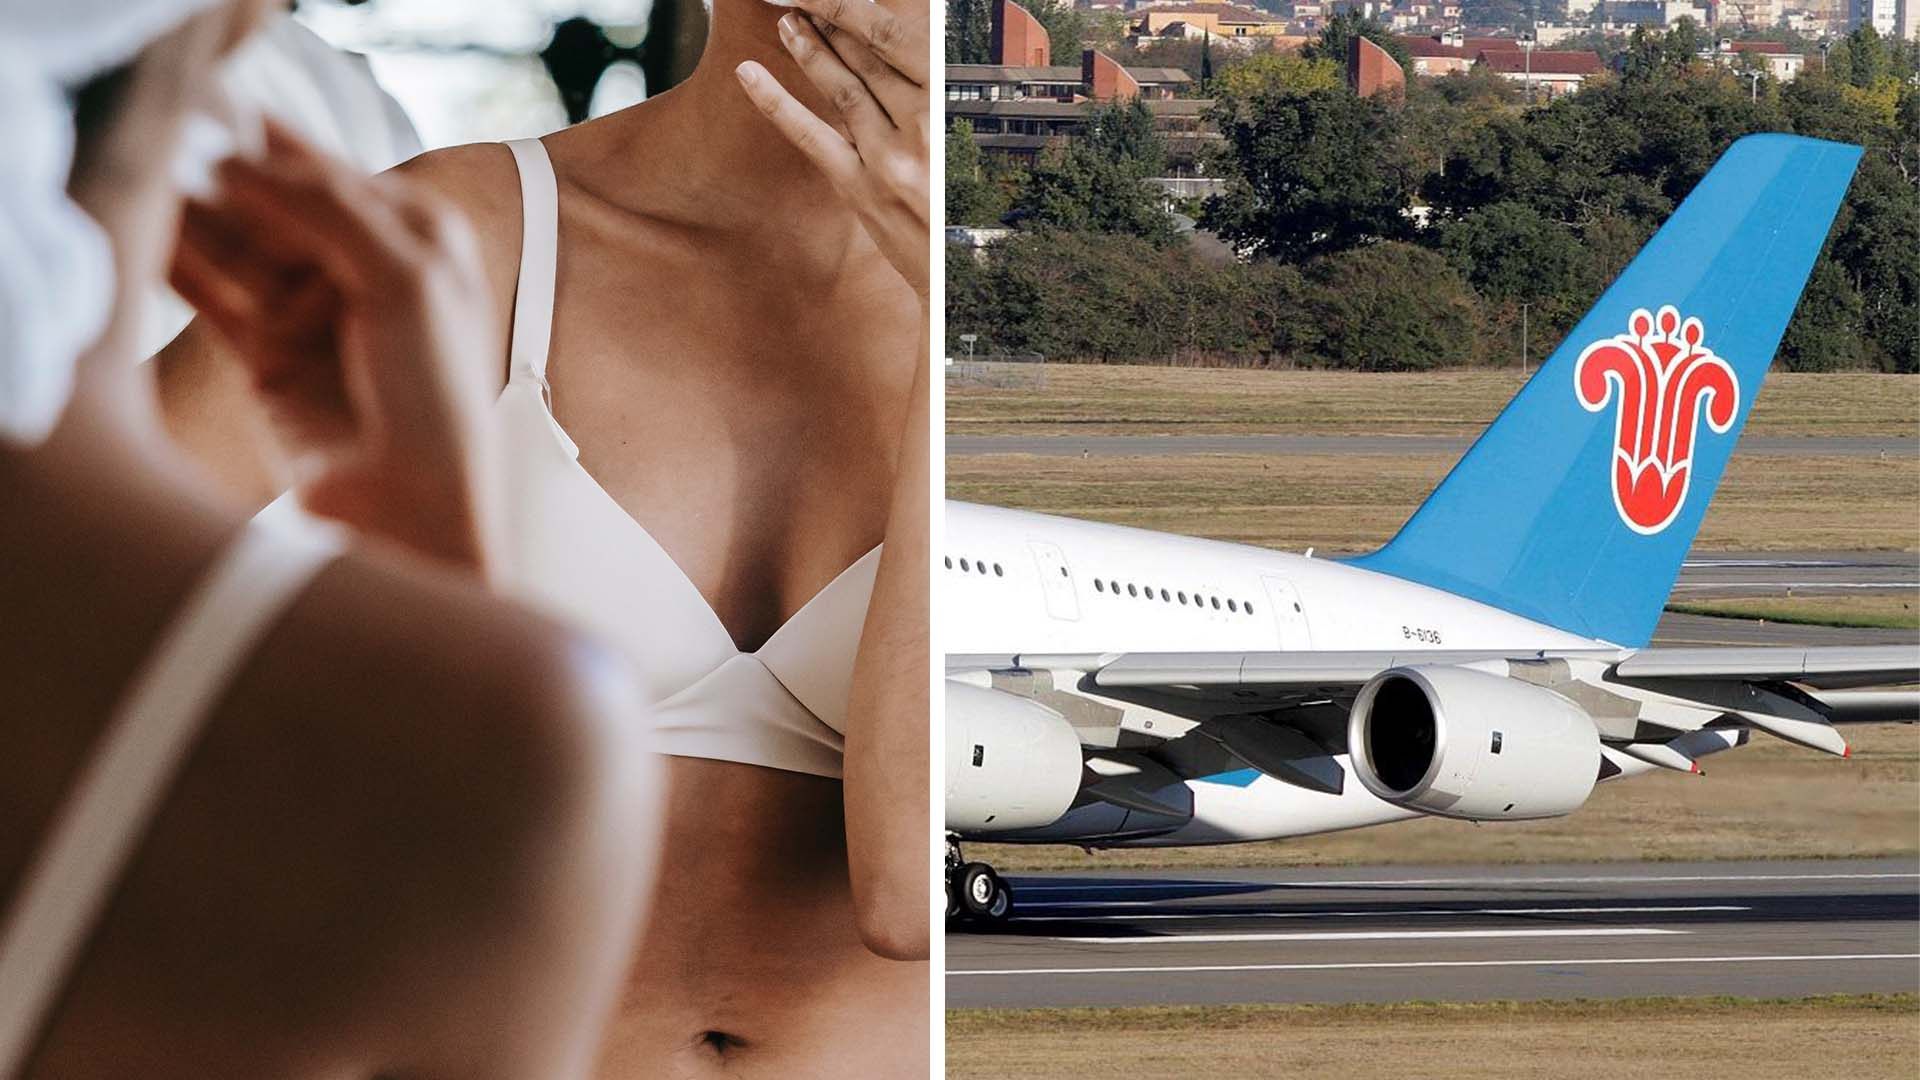 A former Chinese flight attendant fired for posting a lingerie selfie in an aircraft toilet appeals against dismissal amid cyberbullying claims. Photo: SCMP Artwork 